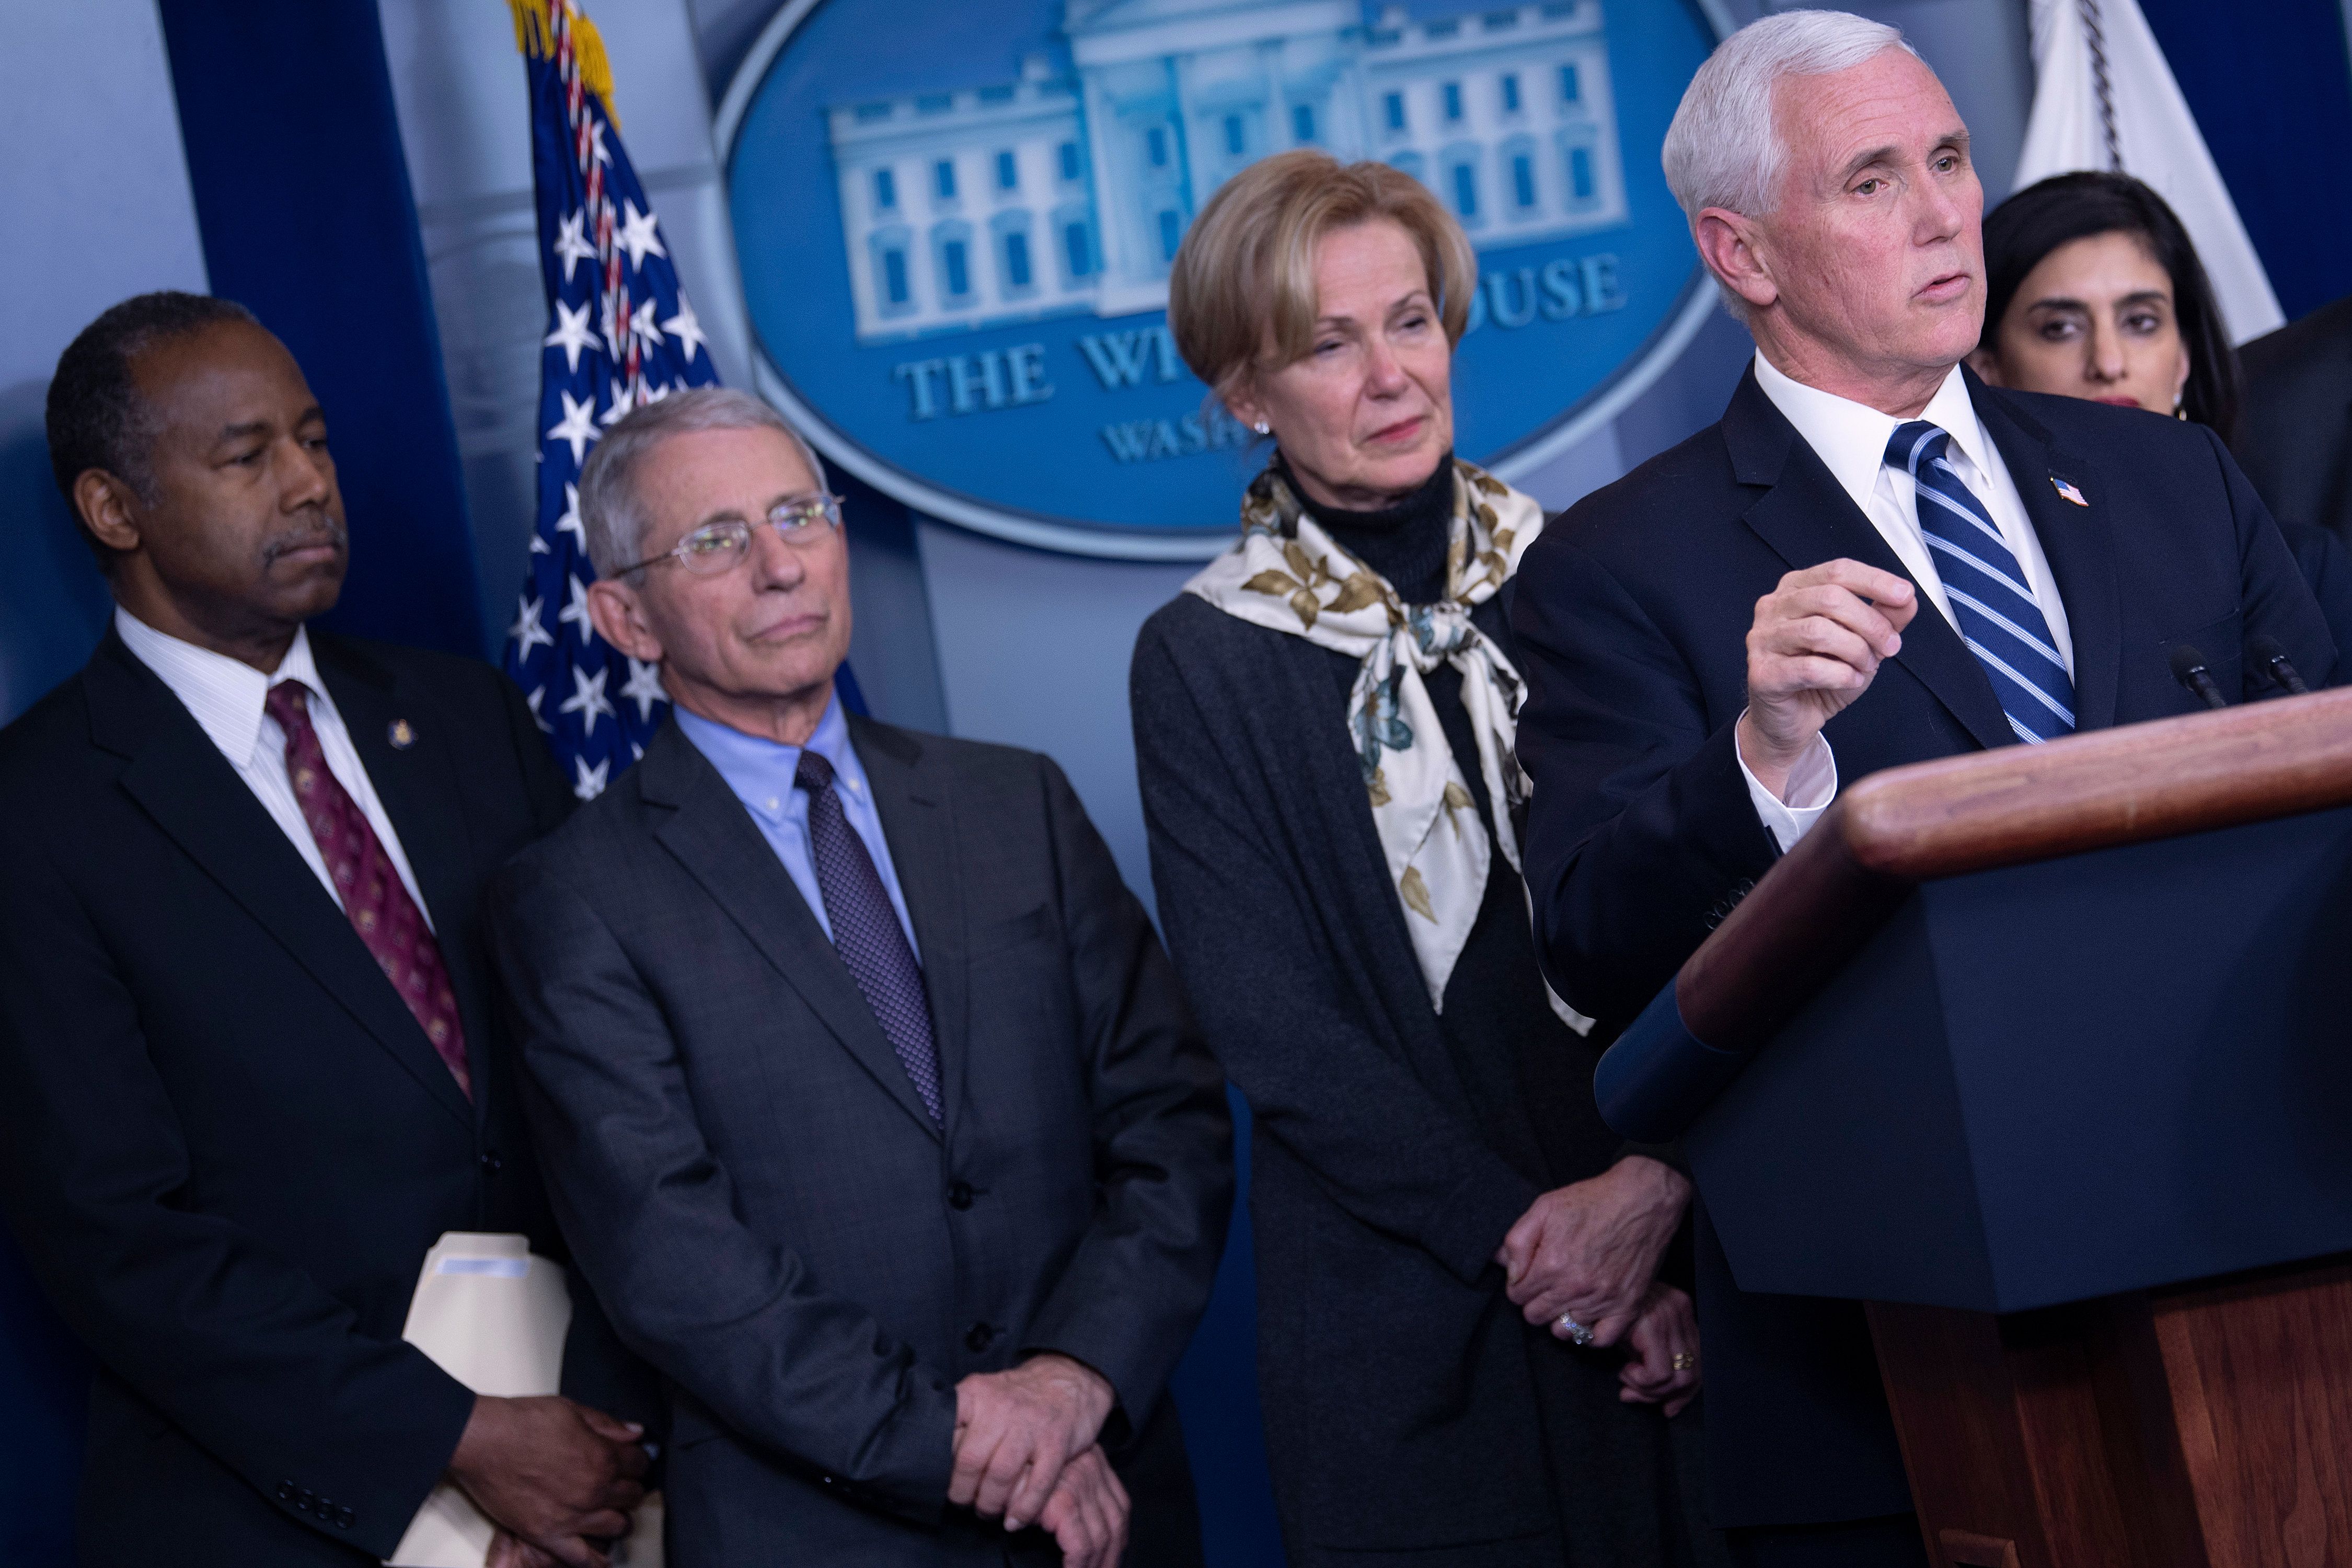 US Vice President Mike Pence, flanked by (from L) HUD Secretary Ben Carson, Dr. Anthony Fauci, Coronavirus response coordinator Dr. Deborah Birx and CMS Administrator Seema Verma, speaks during a briefing about COVID-19 at the White House March 4, 2020, in Washington, DC. (Photo by BRENDAN SMIALOWSKI/AFP via Getty Images)